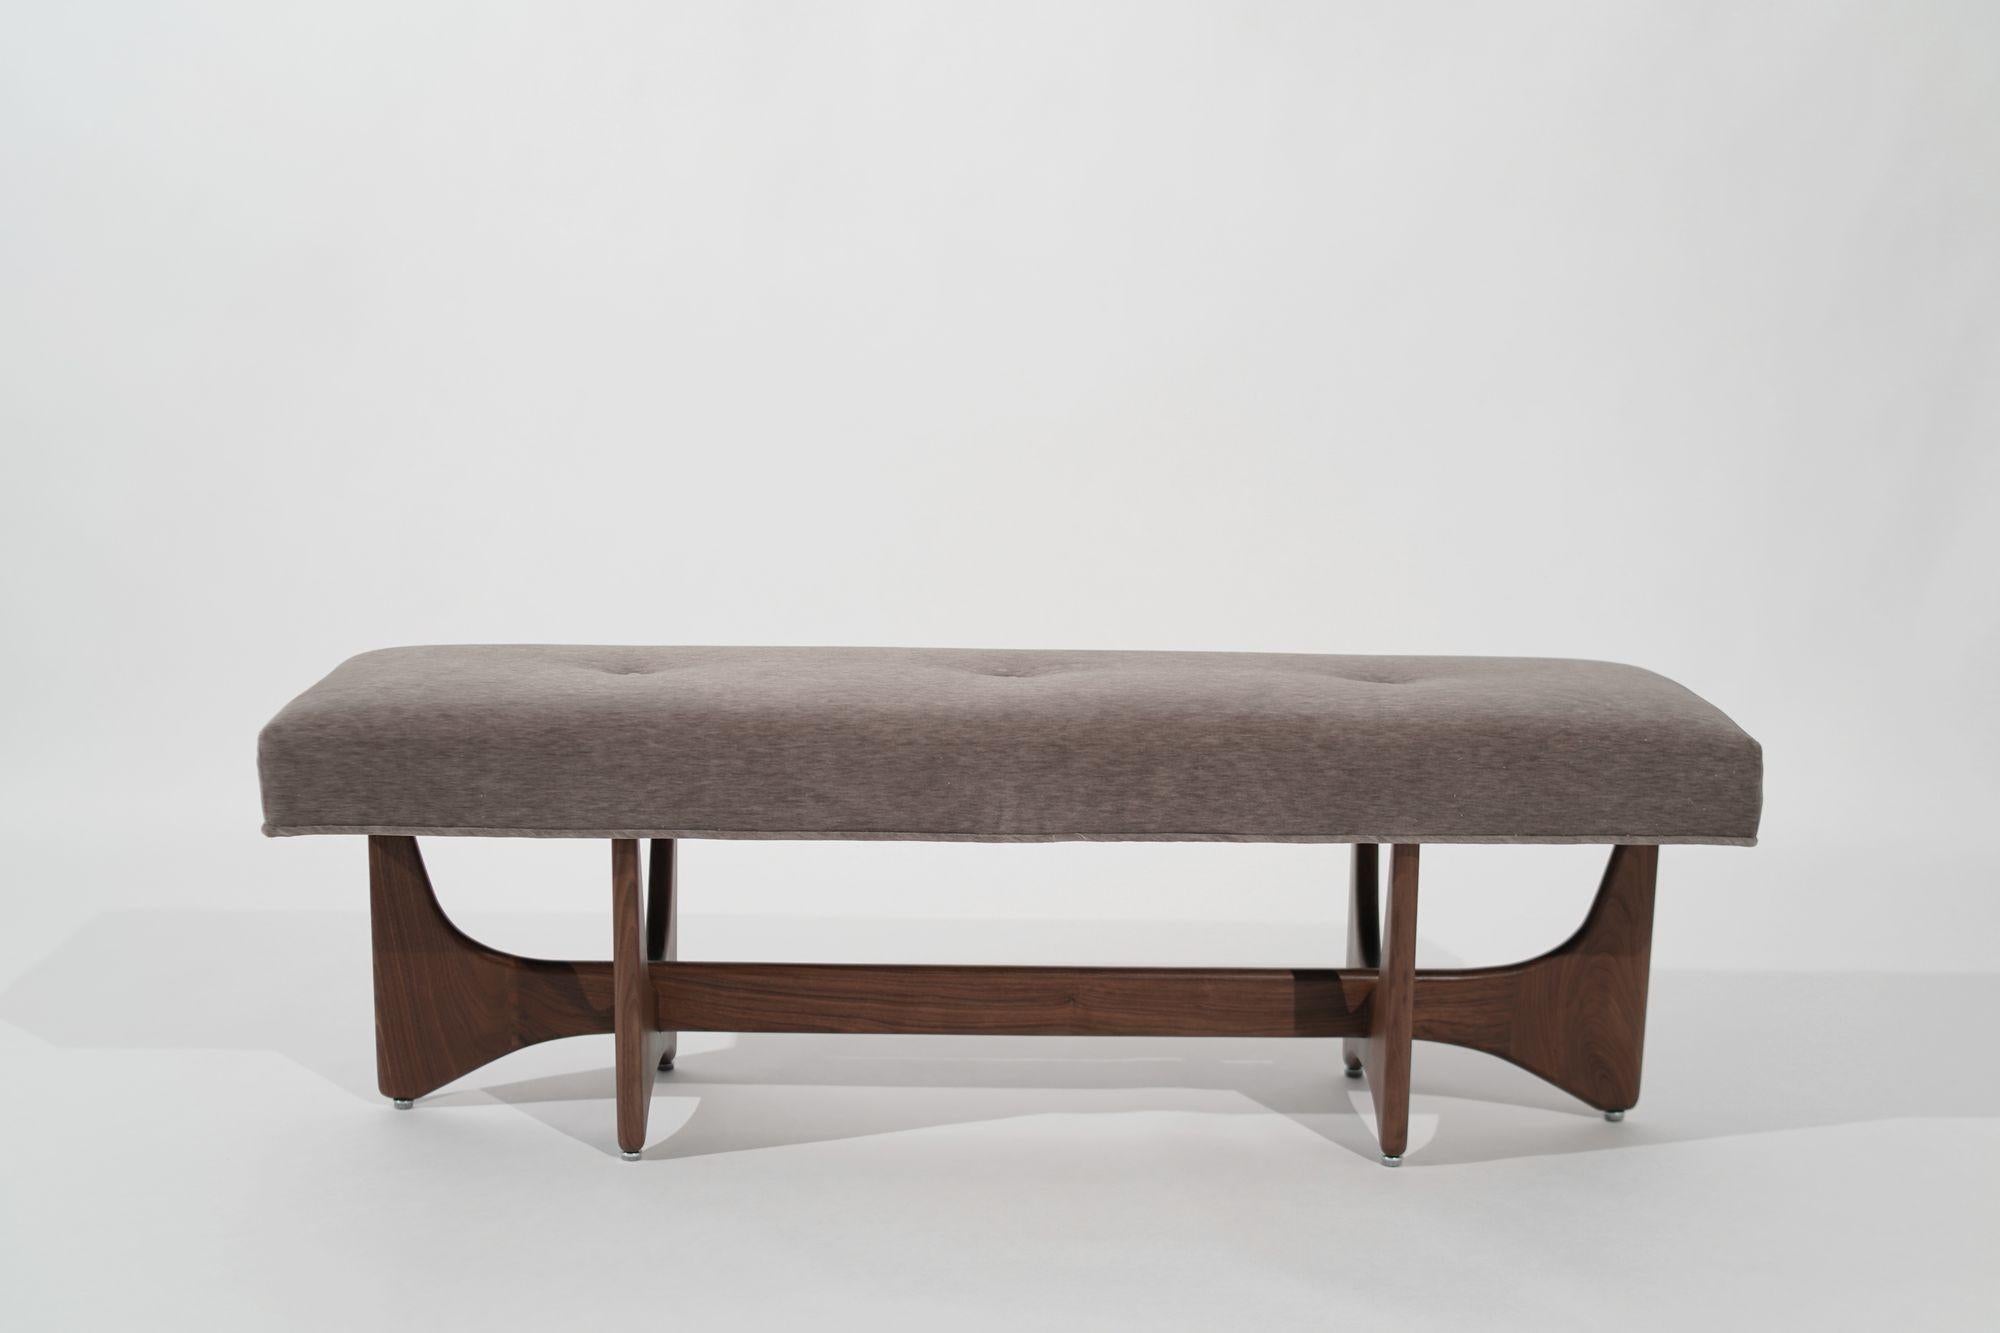 Introducing the Artisanal Bench by Stamford Modern, a captivating sculptural masterpiece that seamlessly blends artistry and functionality. Handcrafted from exquisite solid walnut, this bench elevates any space with its organic shapes and